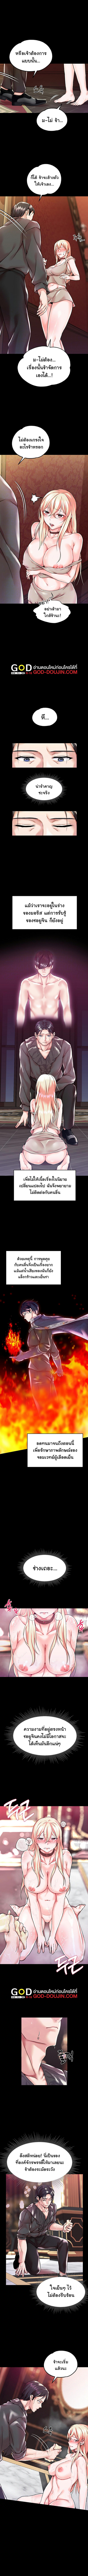 Became Assistant to Villain In RomanceFantasy 2 ภาพที่ 2